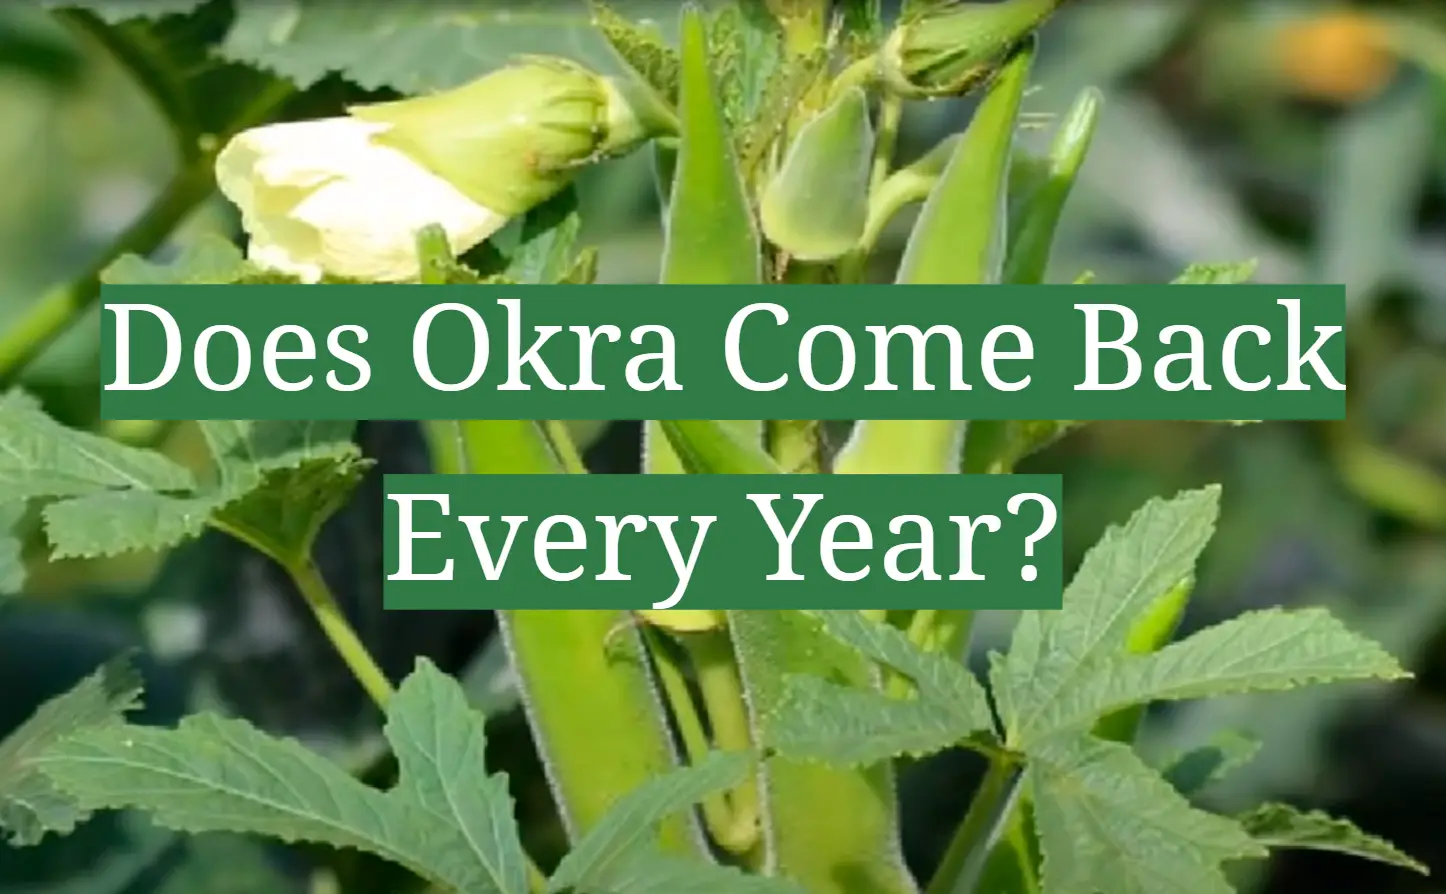 Does Okra Come Back Every Year?